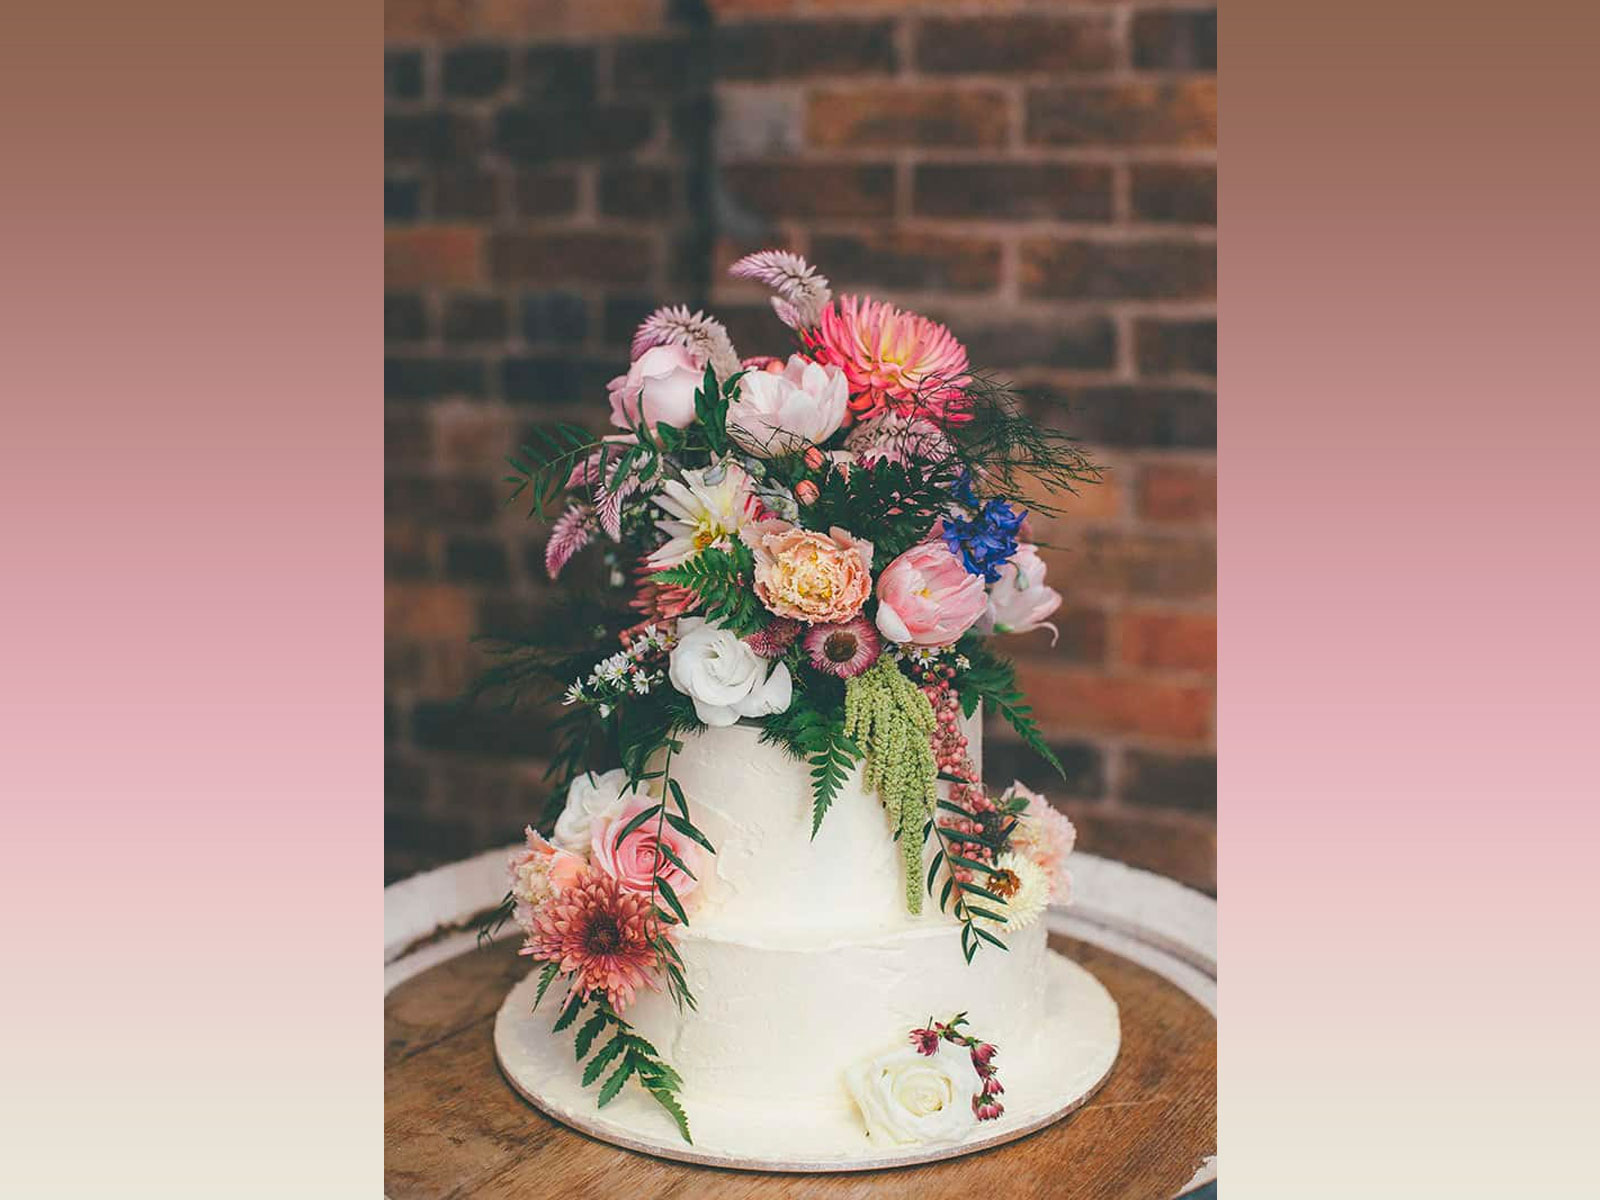 Rate These Wedding Cakes and We’ll Reveal What Your Next Boyfriend Will Be Like 1118